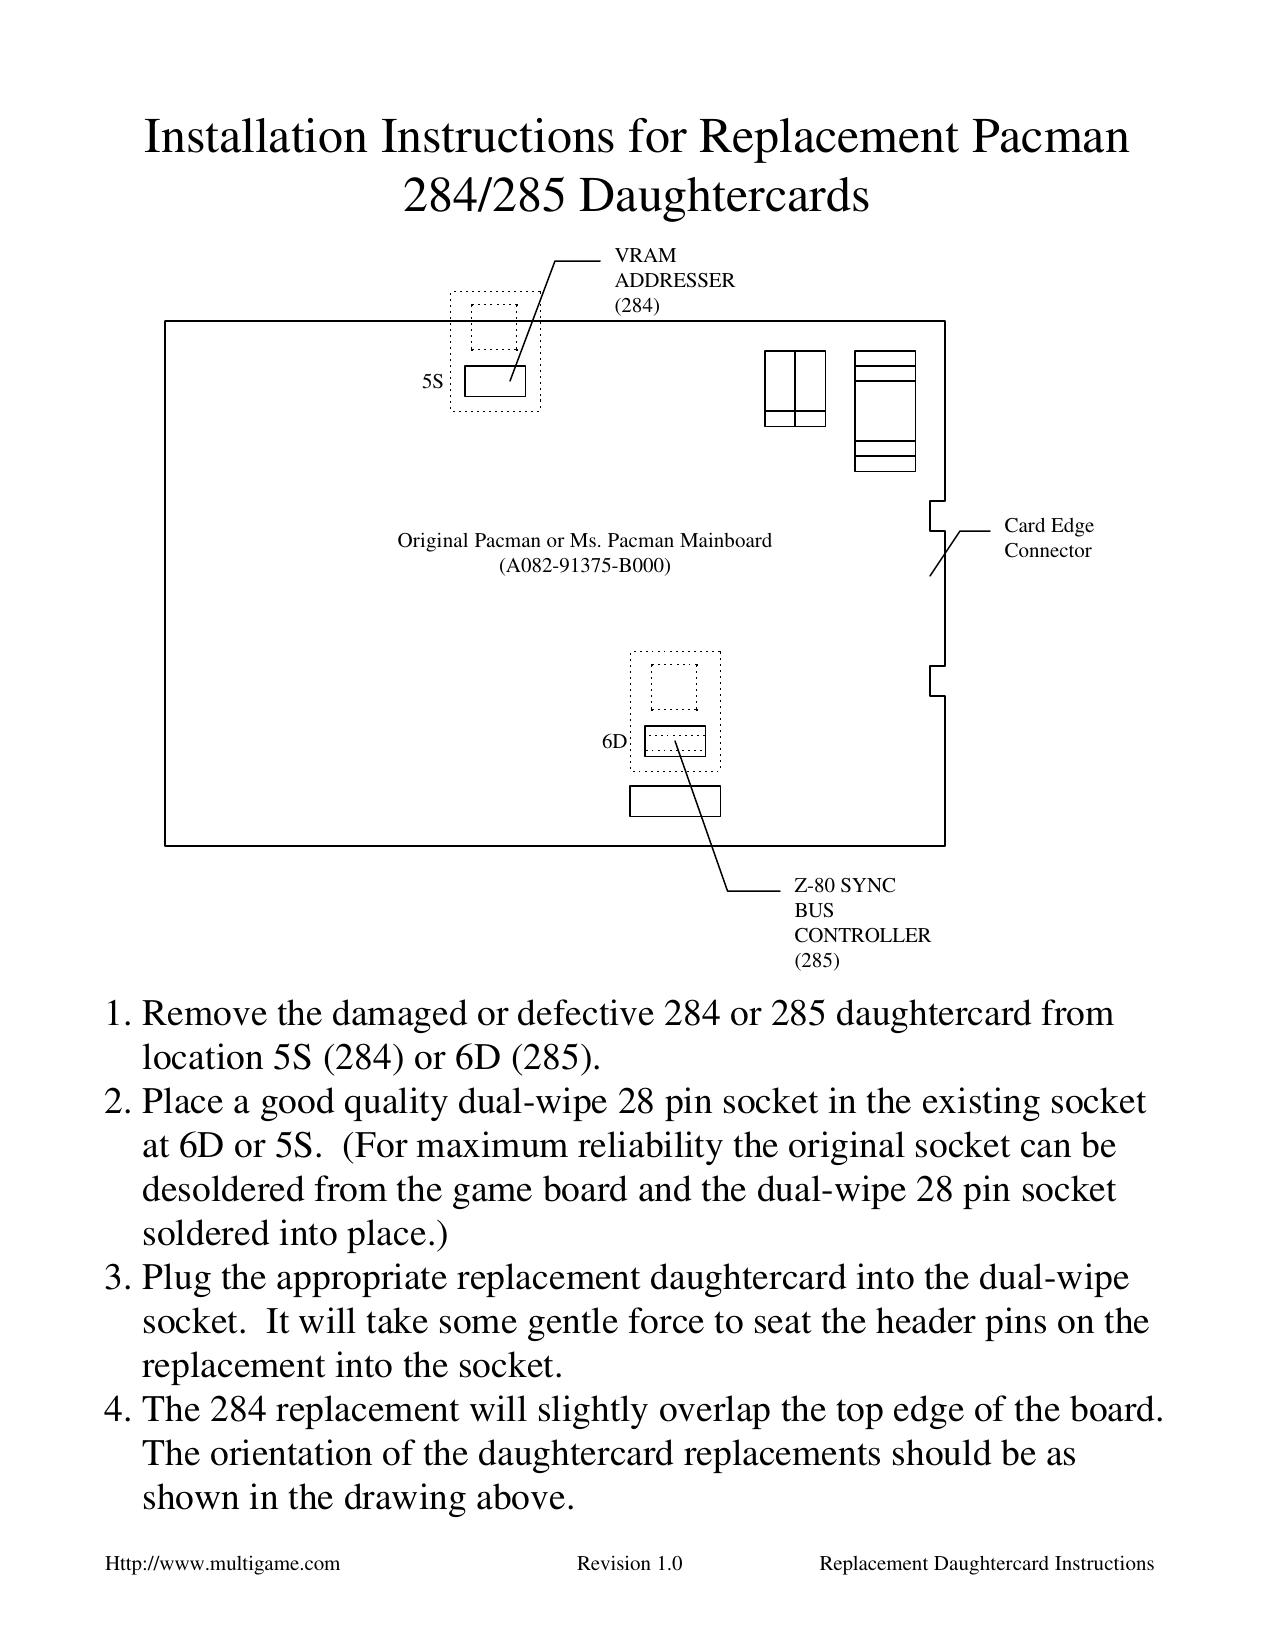 Installation Instructions for Replacment Pacman Daughtercards